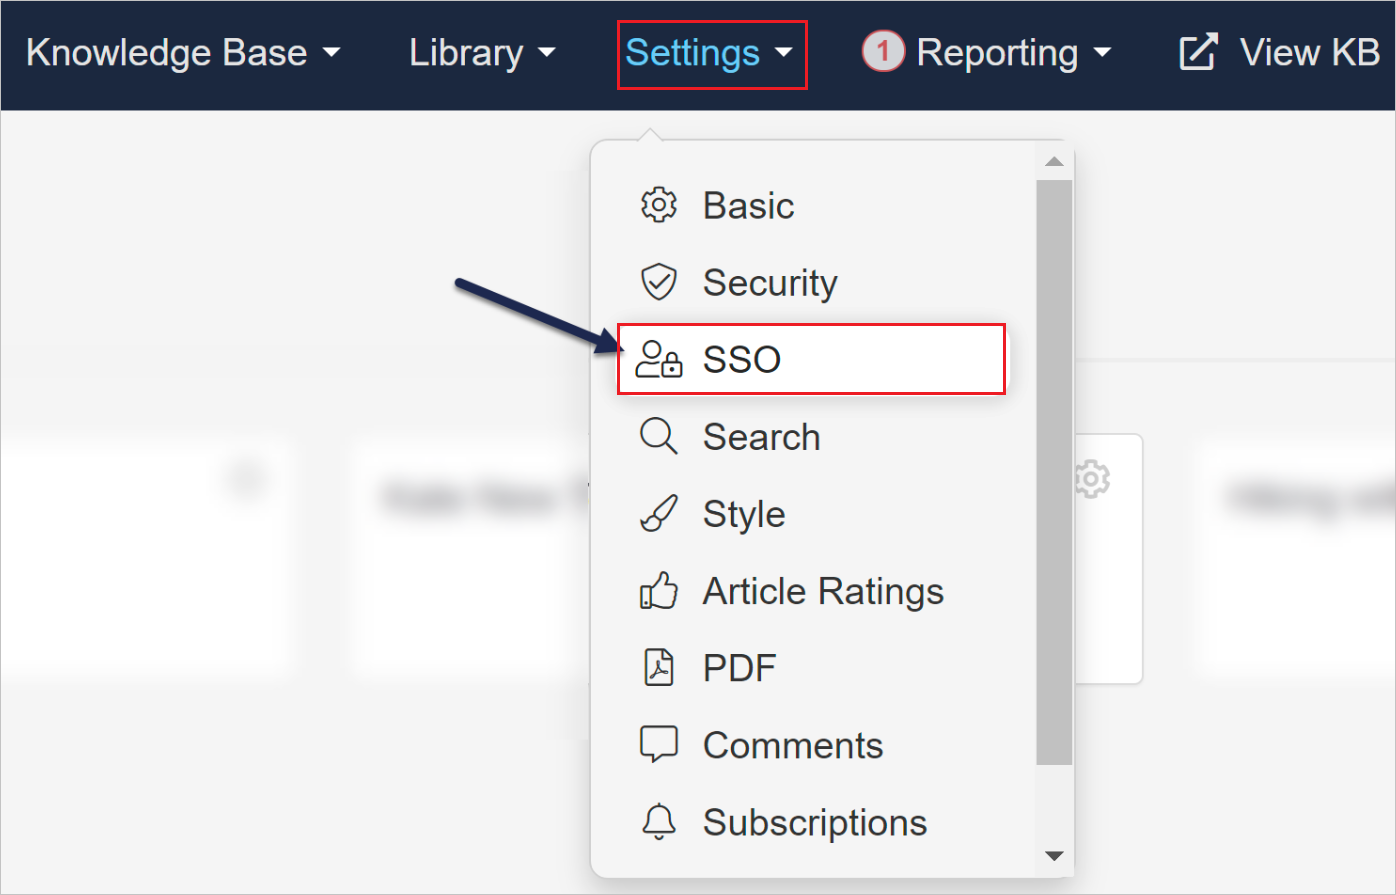 Screenshot shows SSO selected from the Settings menu.